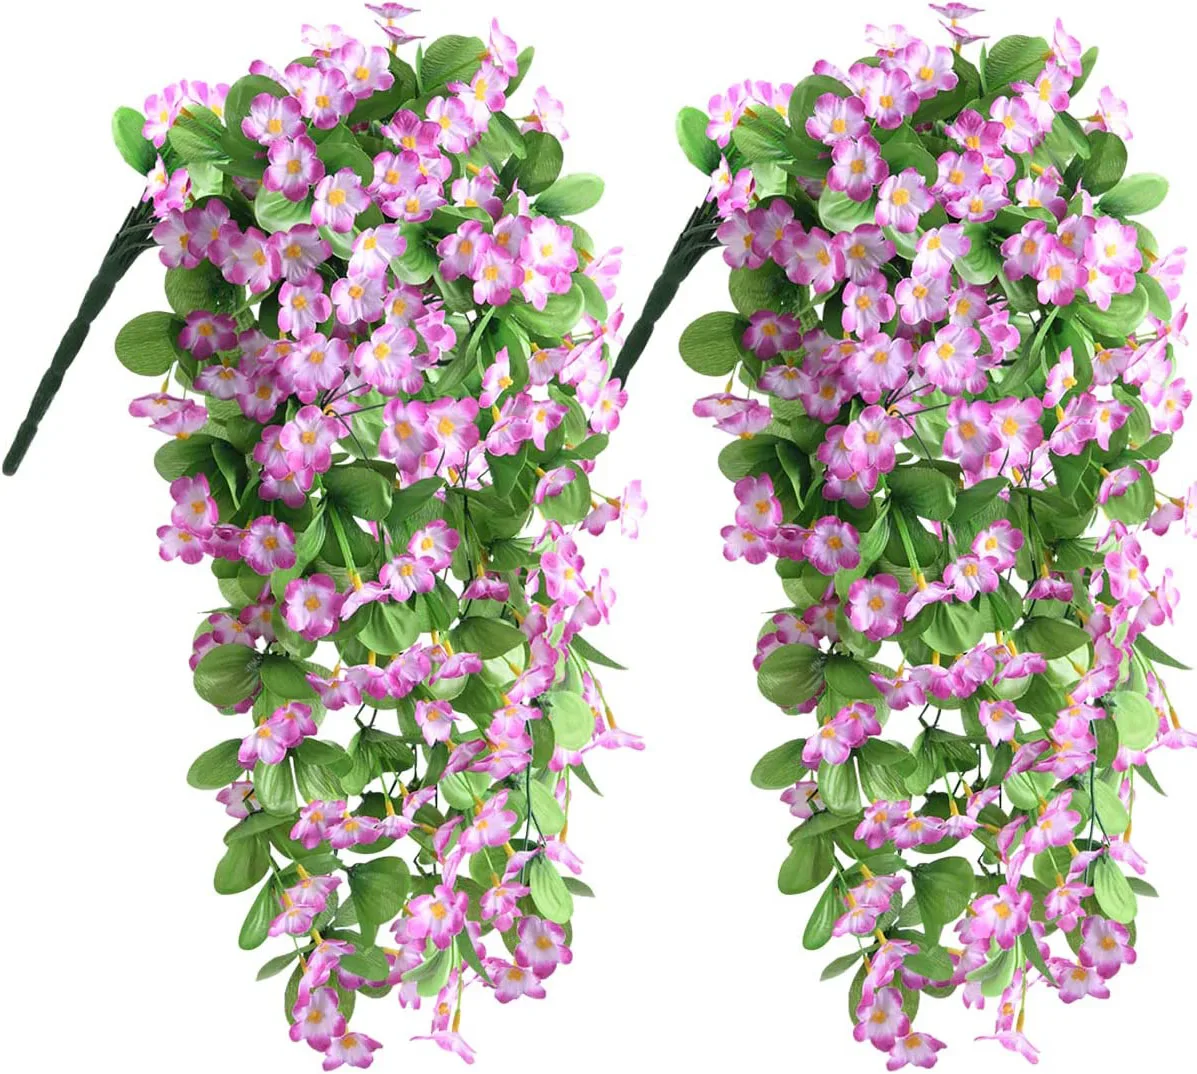 

2pcs Pink Purple Artificial Hanging Flowers Fake Hanging Plants Orchid Flower Bouquet for Wall Home Room Garden Wedding Outdoor